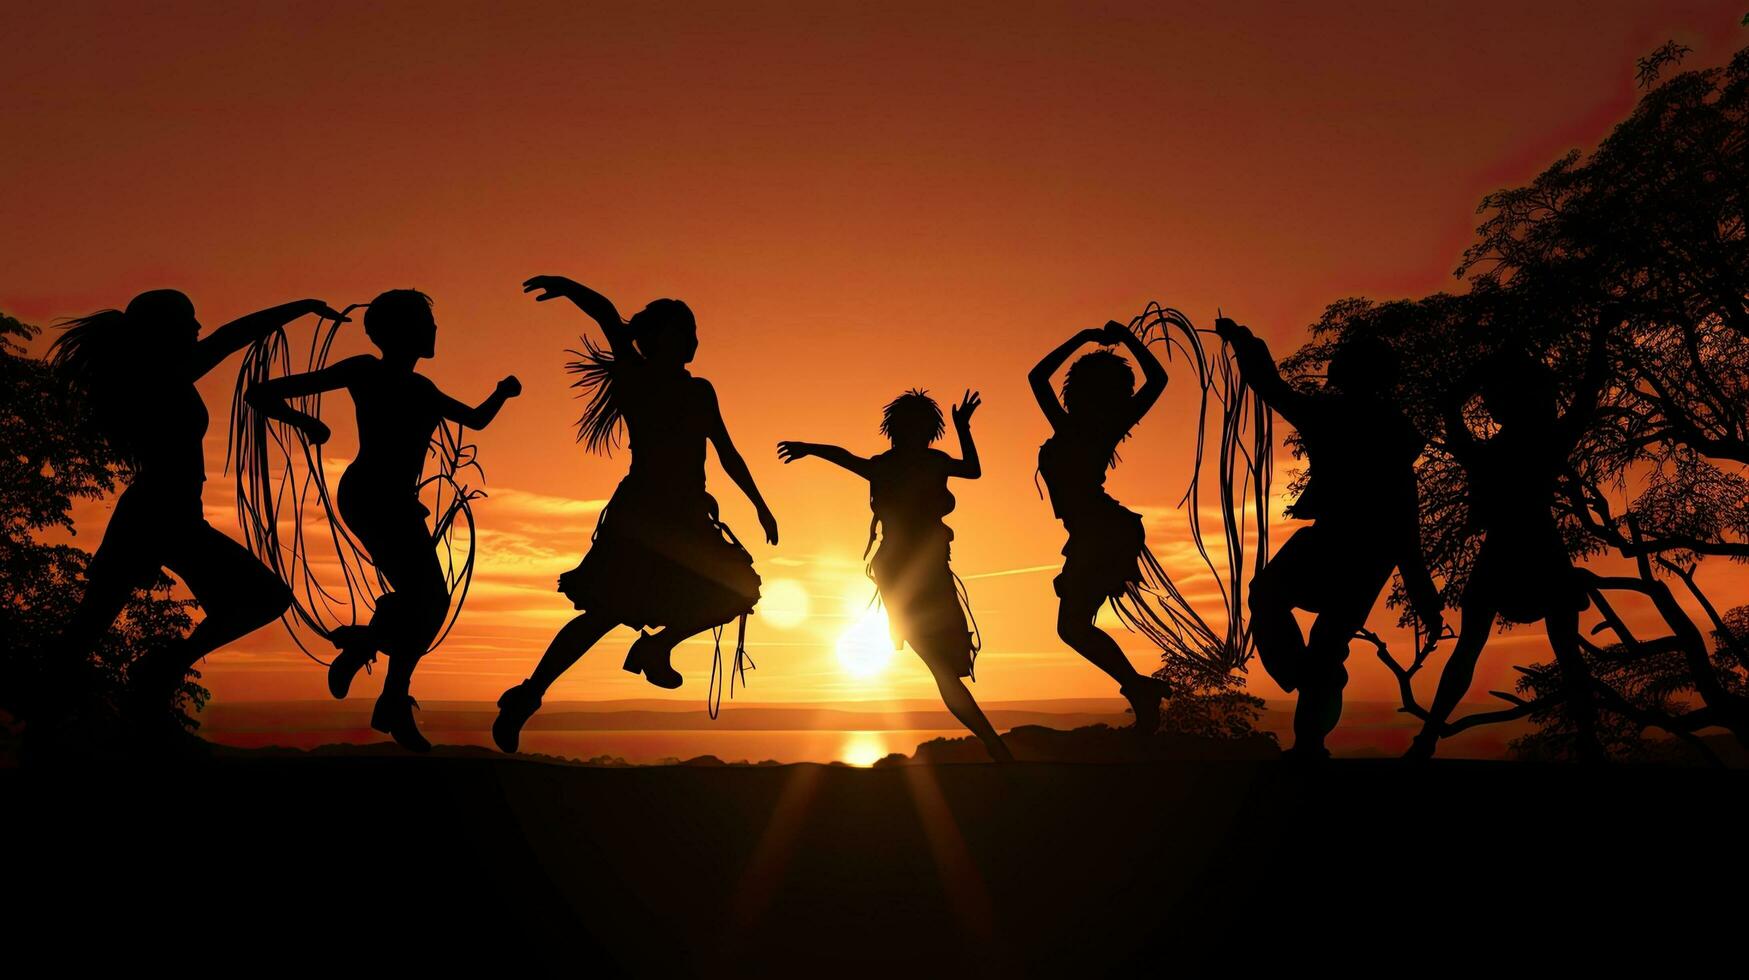 Group dancing at sunset in silhouette photo